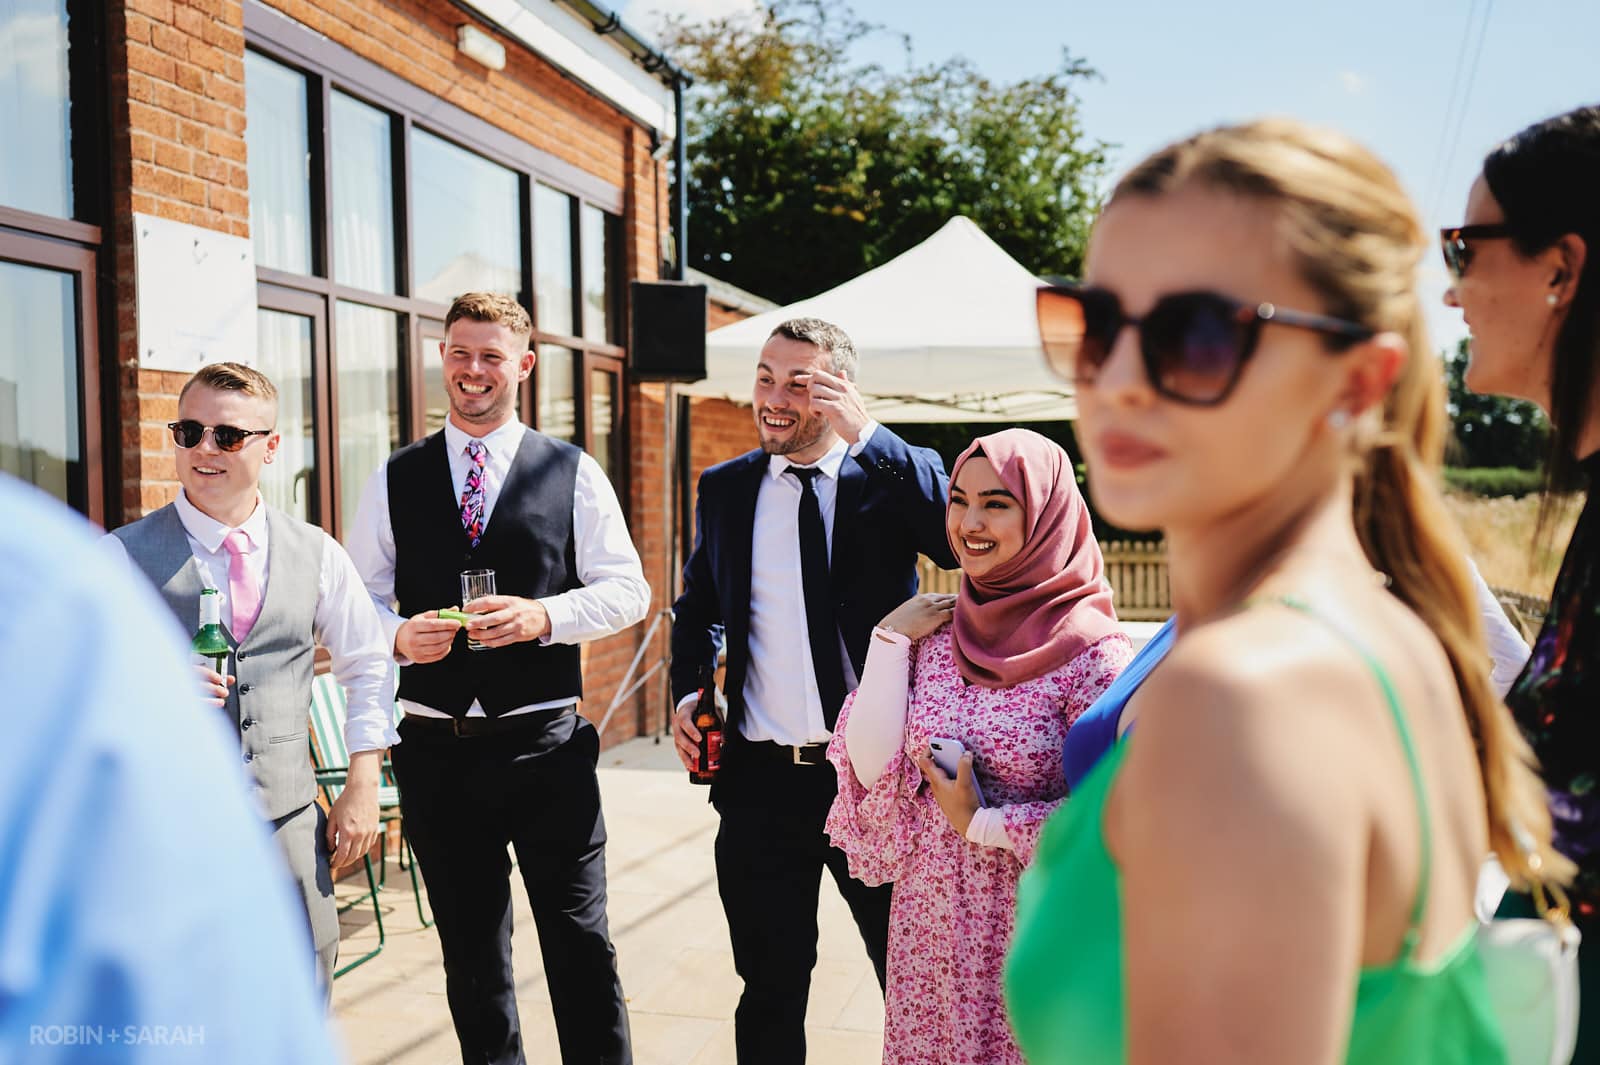 Wedding guests chat and relax at Bentley Village Hall reception